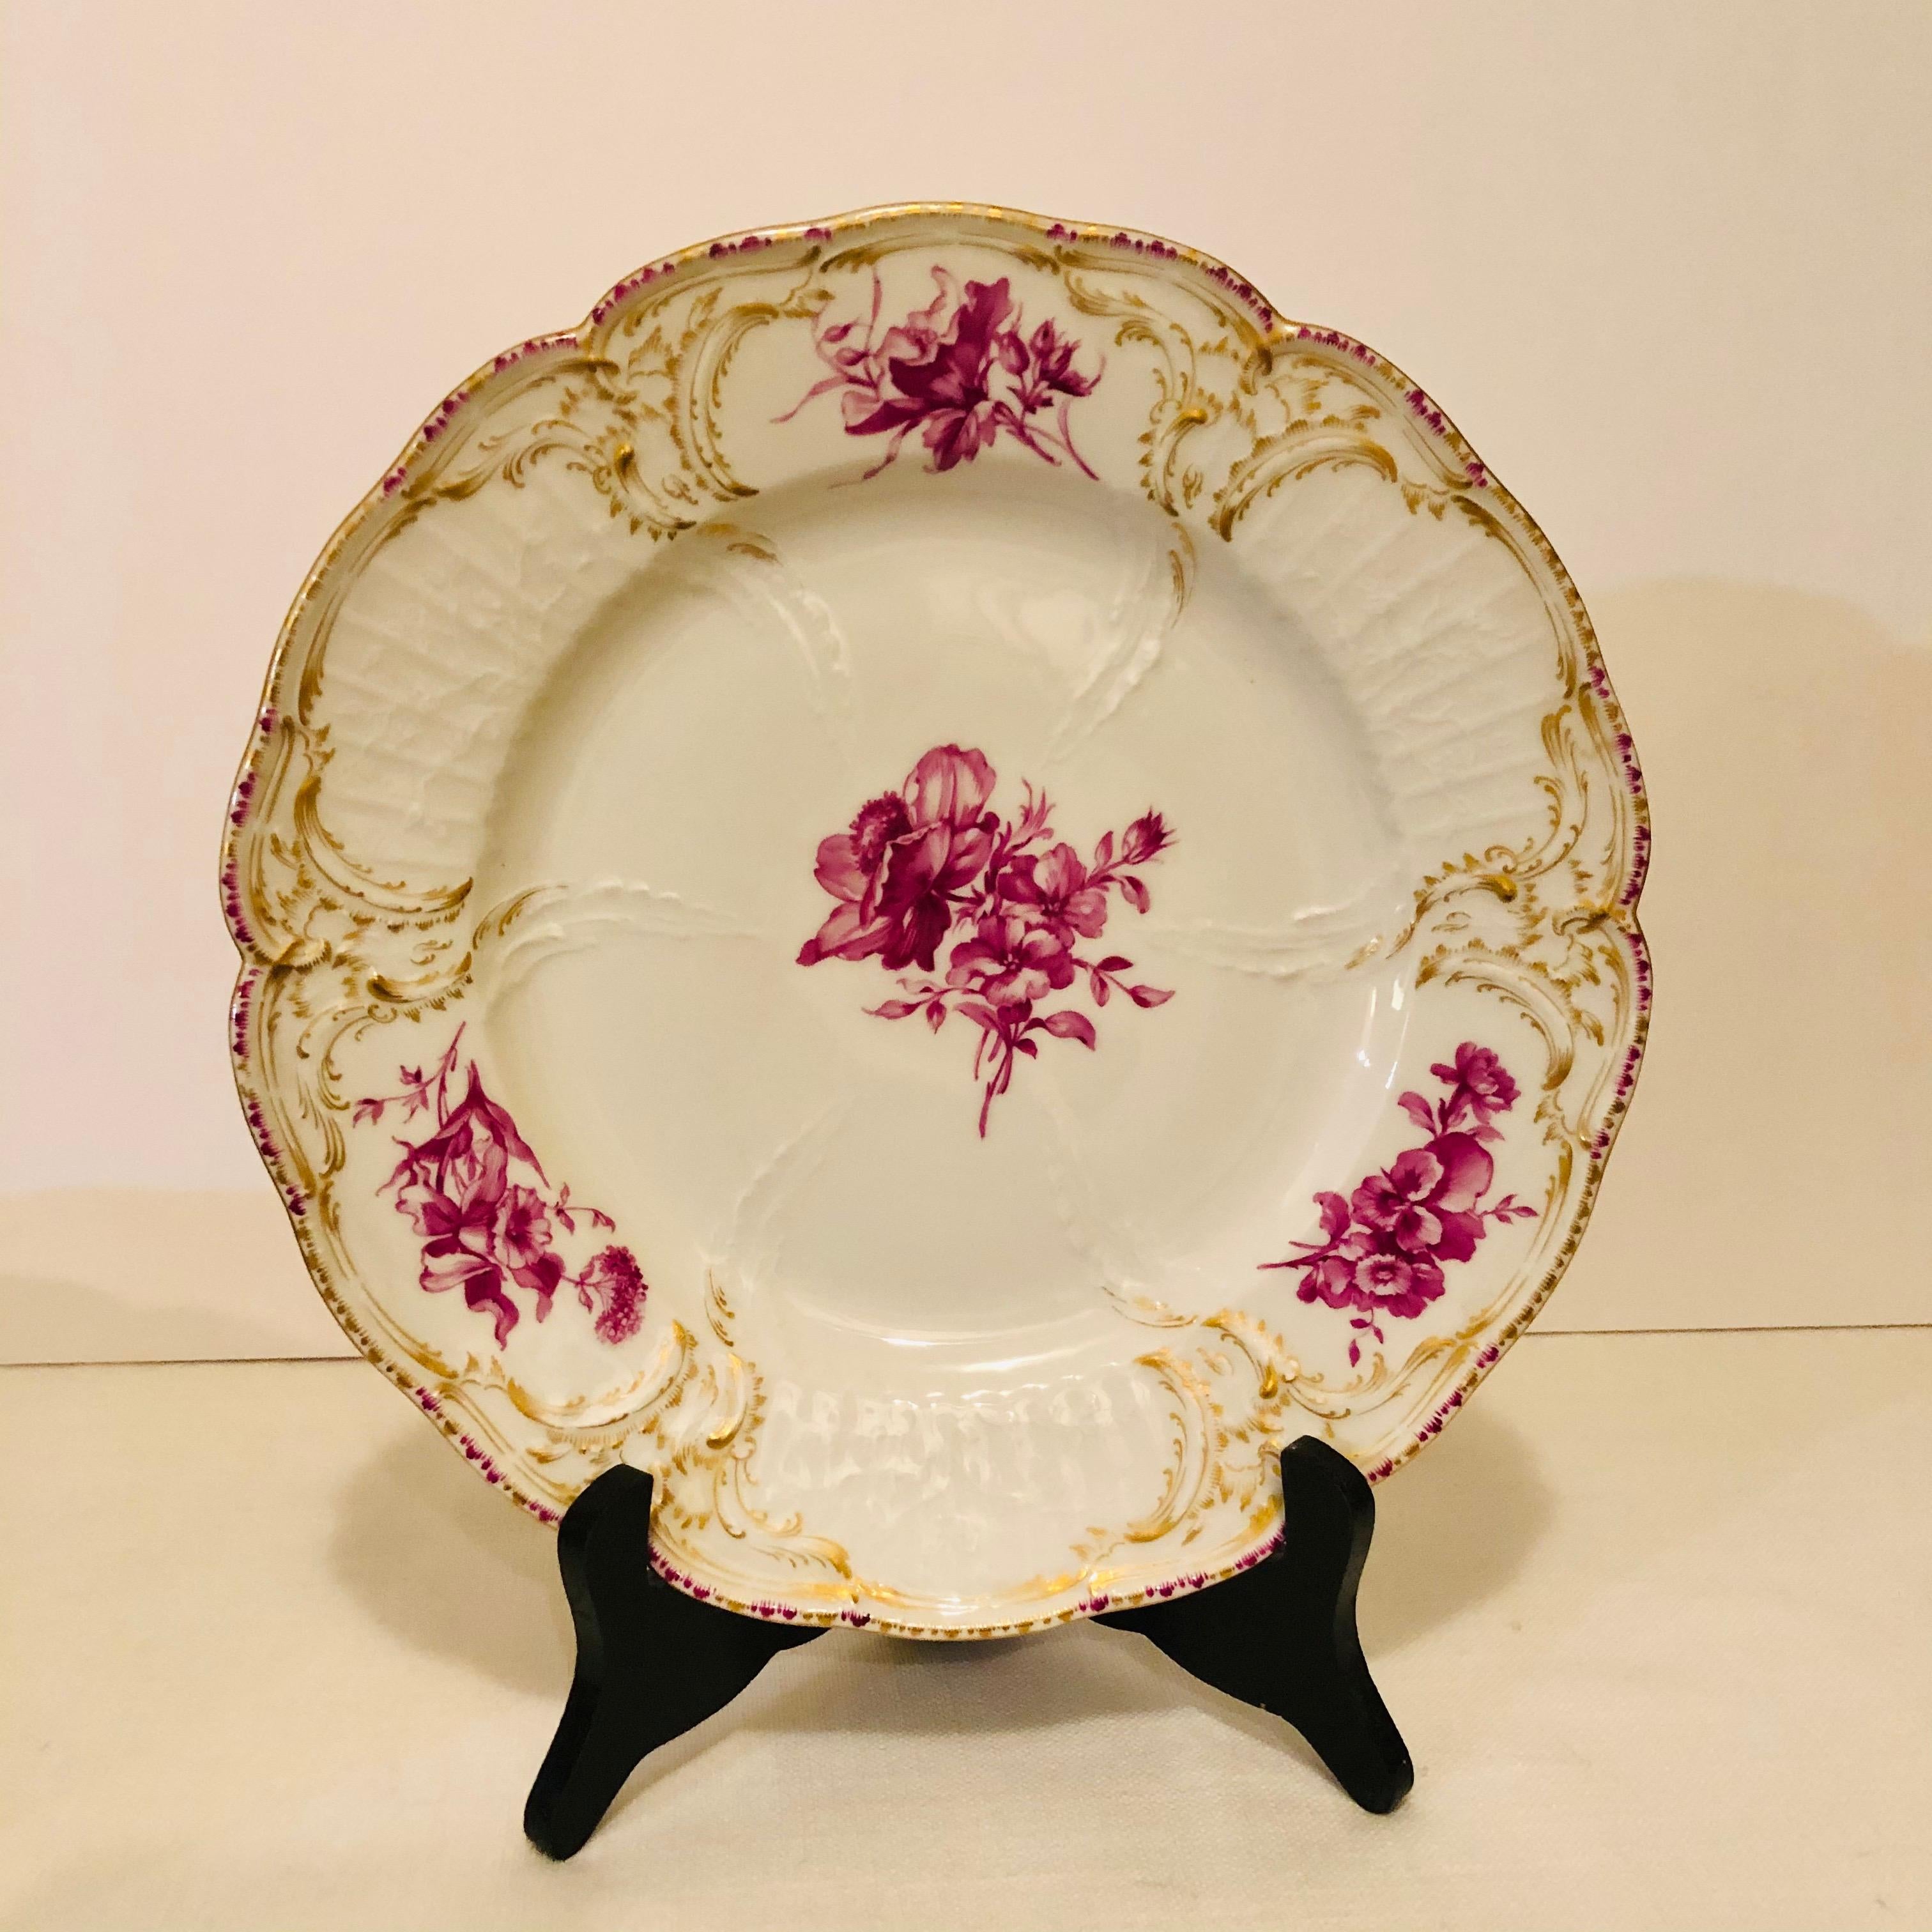 Twelve KPM Dinner Plates Each Painted with a Different Puce Flower Bouquet For Sale 5